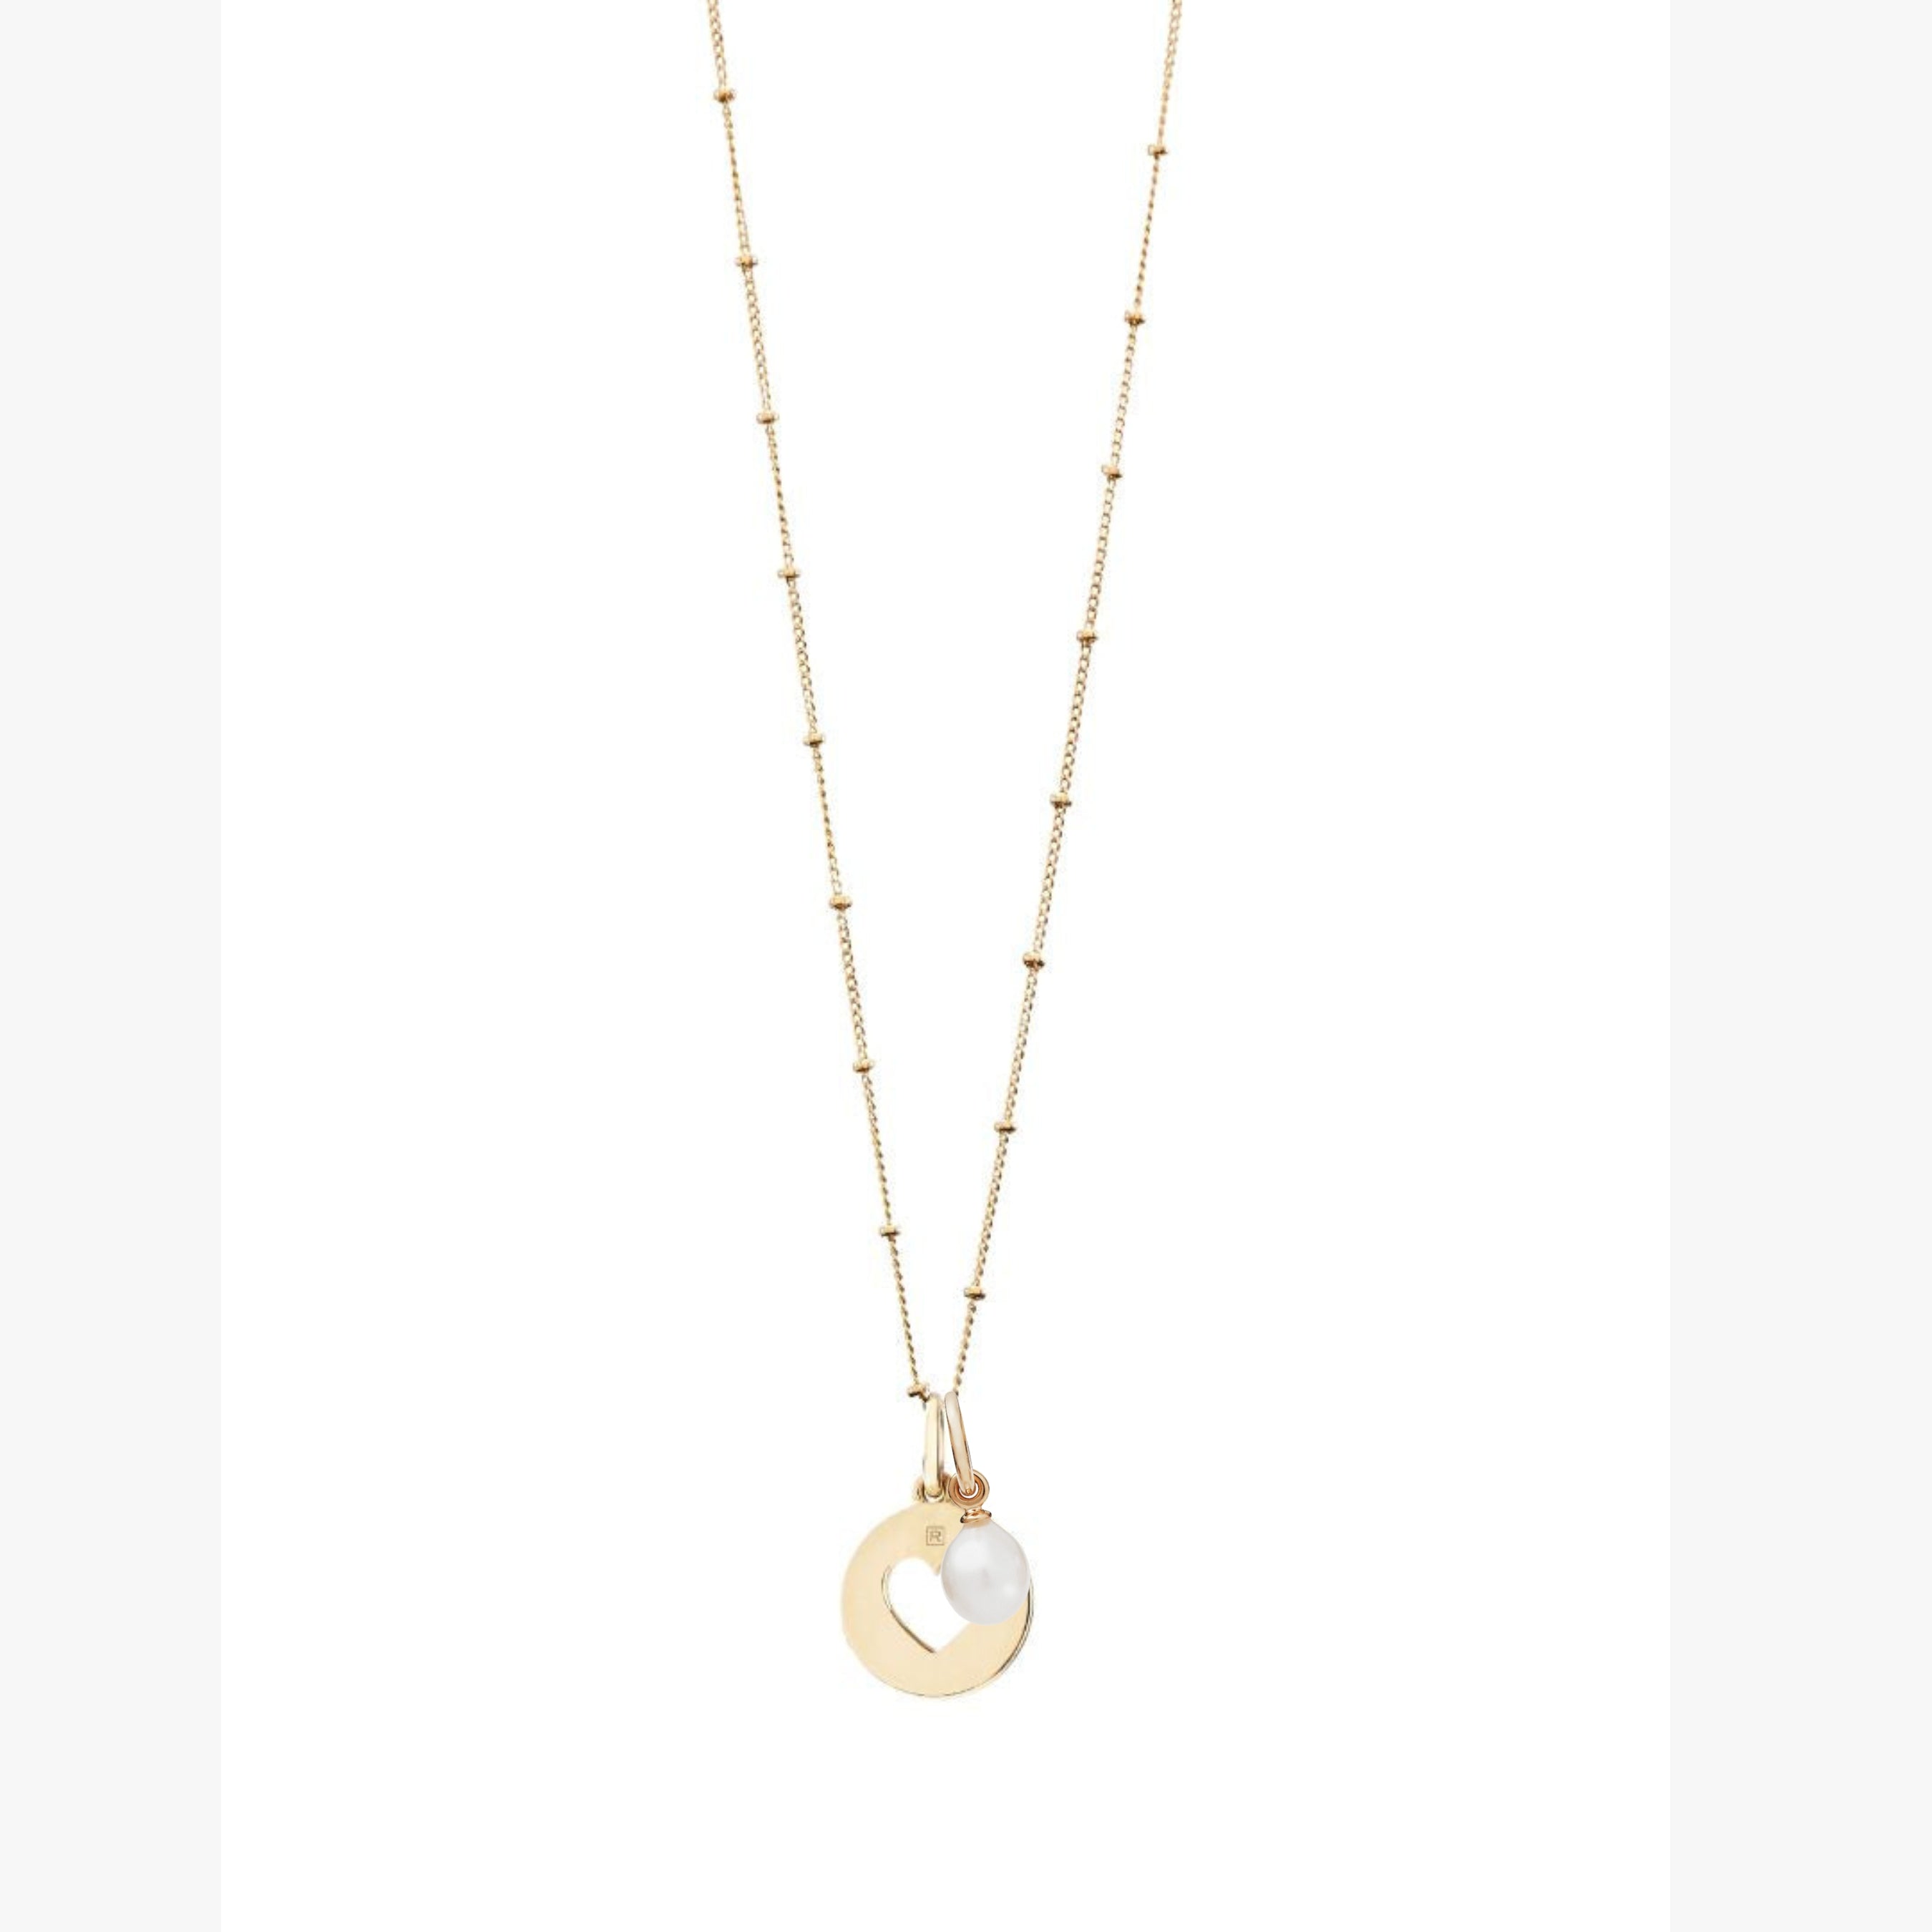 Gold Bobble Chain Necklace with Gold Heart and Pearl Gift Set